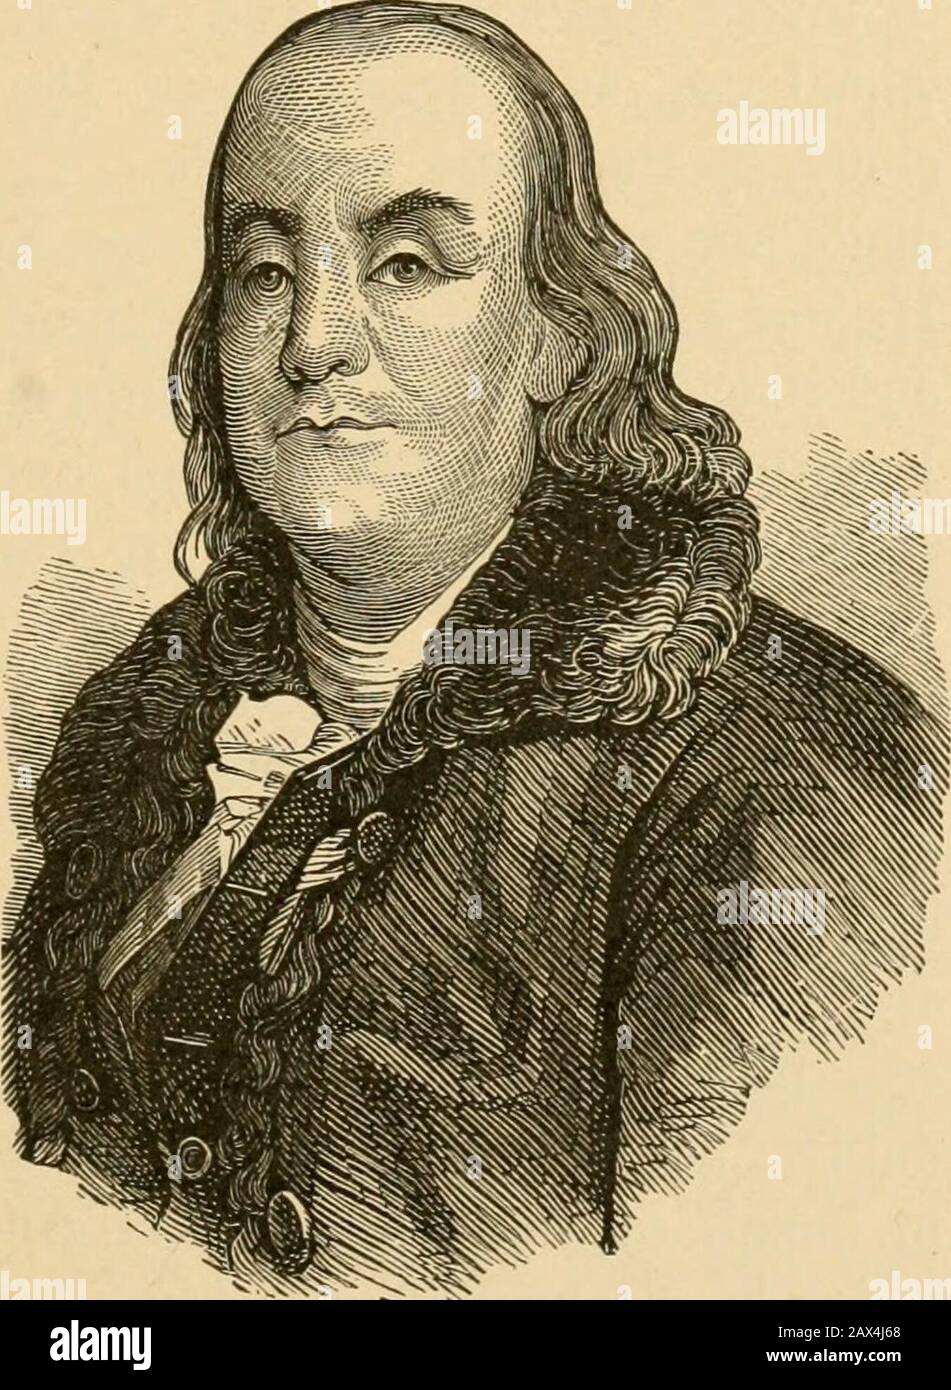 Young folks' history of the United States . N AND ADAMS. 227 who had rendered the greatest services to the hbertyof their country. This was Dr. Benjamin Franklin.He was born in Boston, in 1706, and was the son of apoor tallow-chandler. When a boy he learned theprinters trade; and at seventeen left home, and estab-lished himself in Philadelphia. He and a young part-ner began busi-ness with no capi-tal, and felt verygrateful to a friendwhom they met inthe street, who,gave them a five-shilling job. Thenthey set up a news-paper, and pub-lished an alma-nac, called PoorRichards Alma-nack, which hada Stock Photo